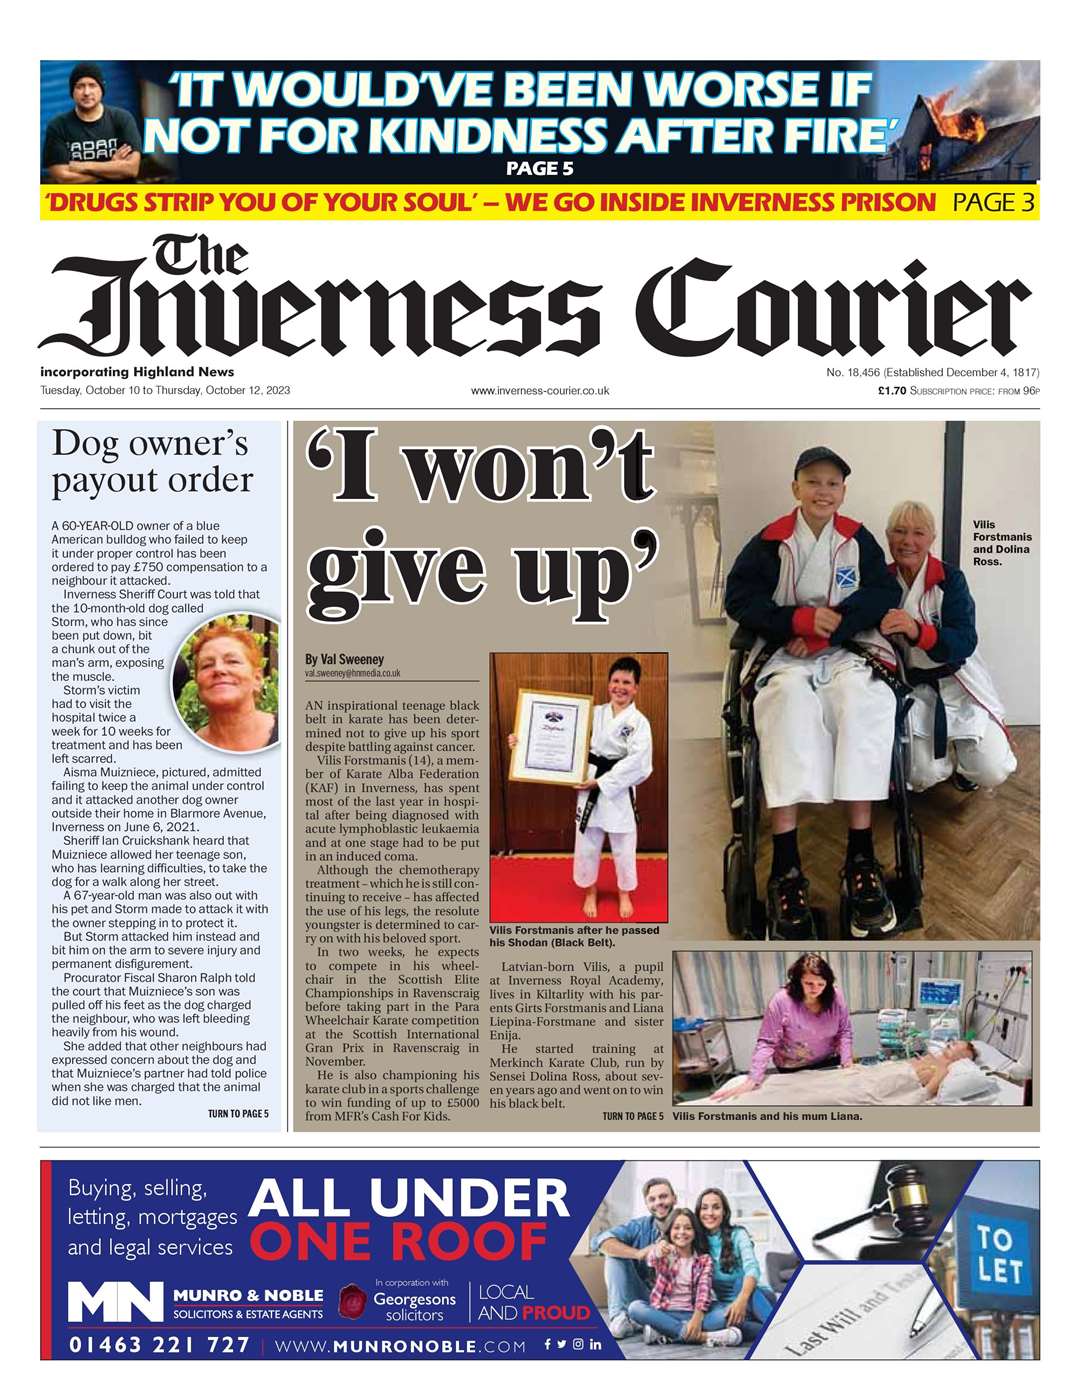 The Inverness Courier, October 10, front page.